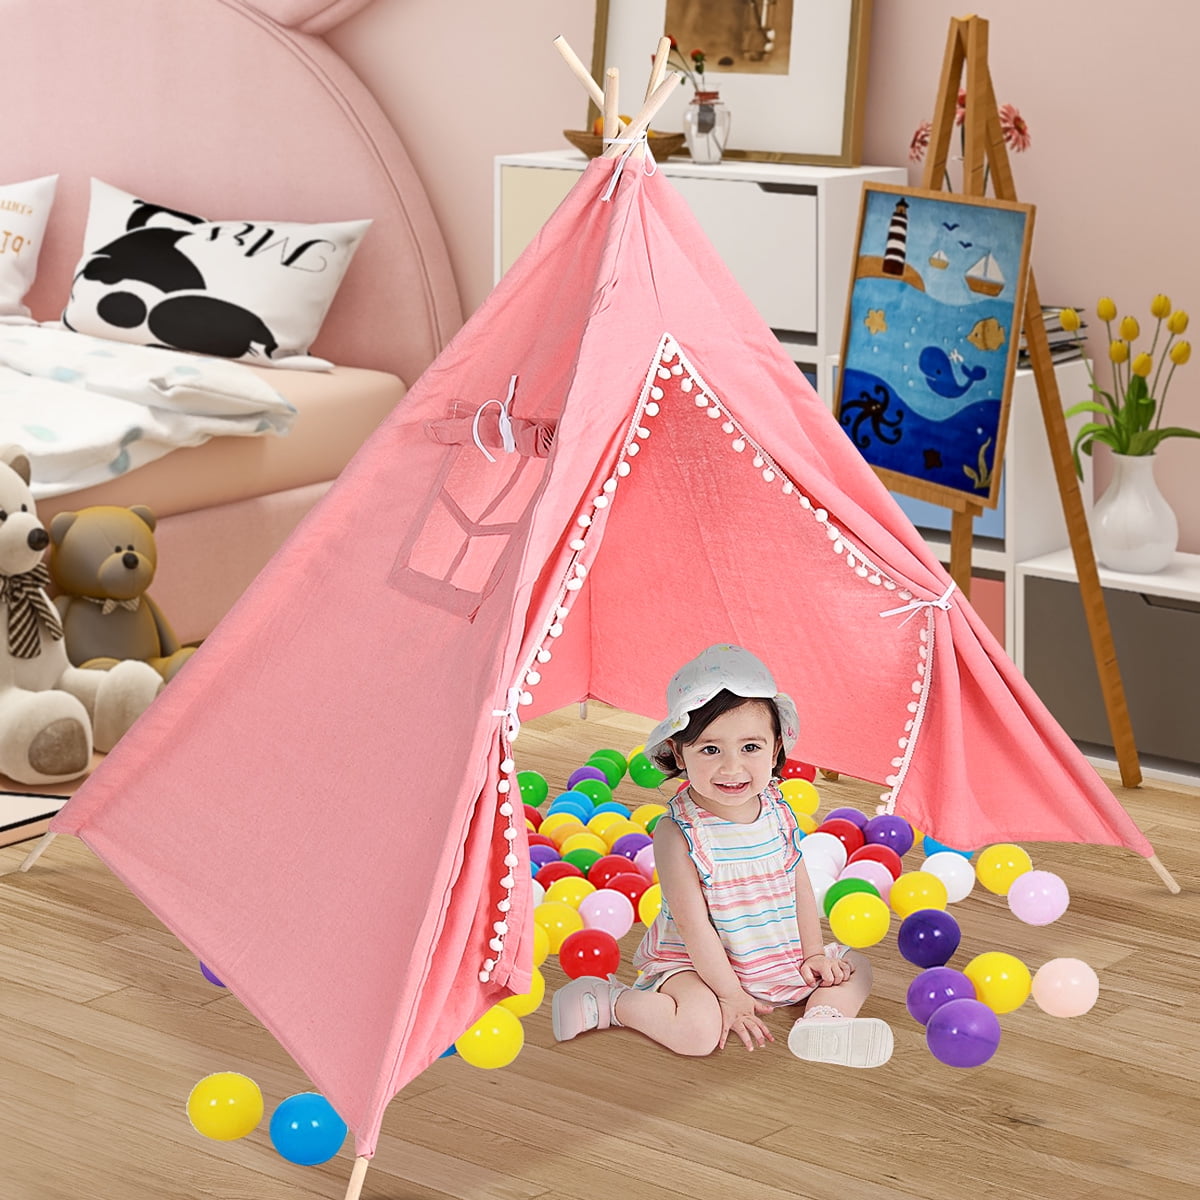 Kids Teepee Tent Play Tent Children Indoor Outdoot Play House Kid Toy   US